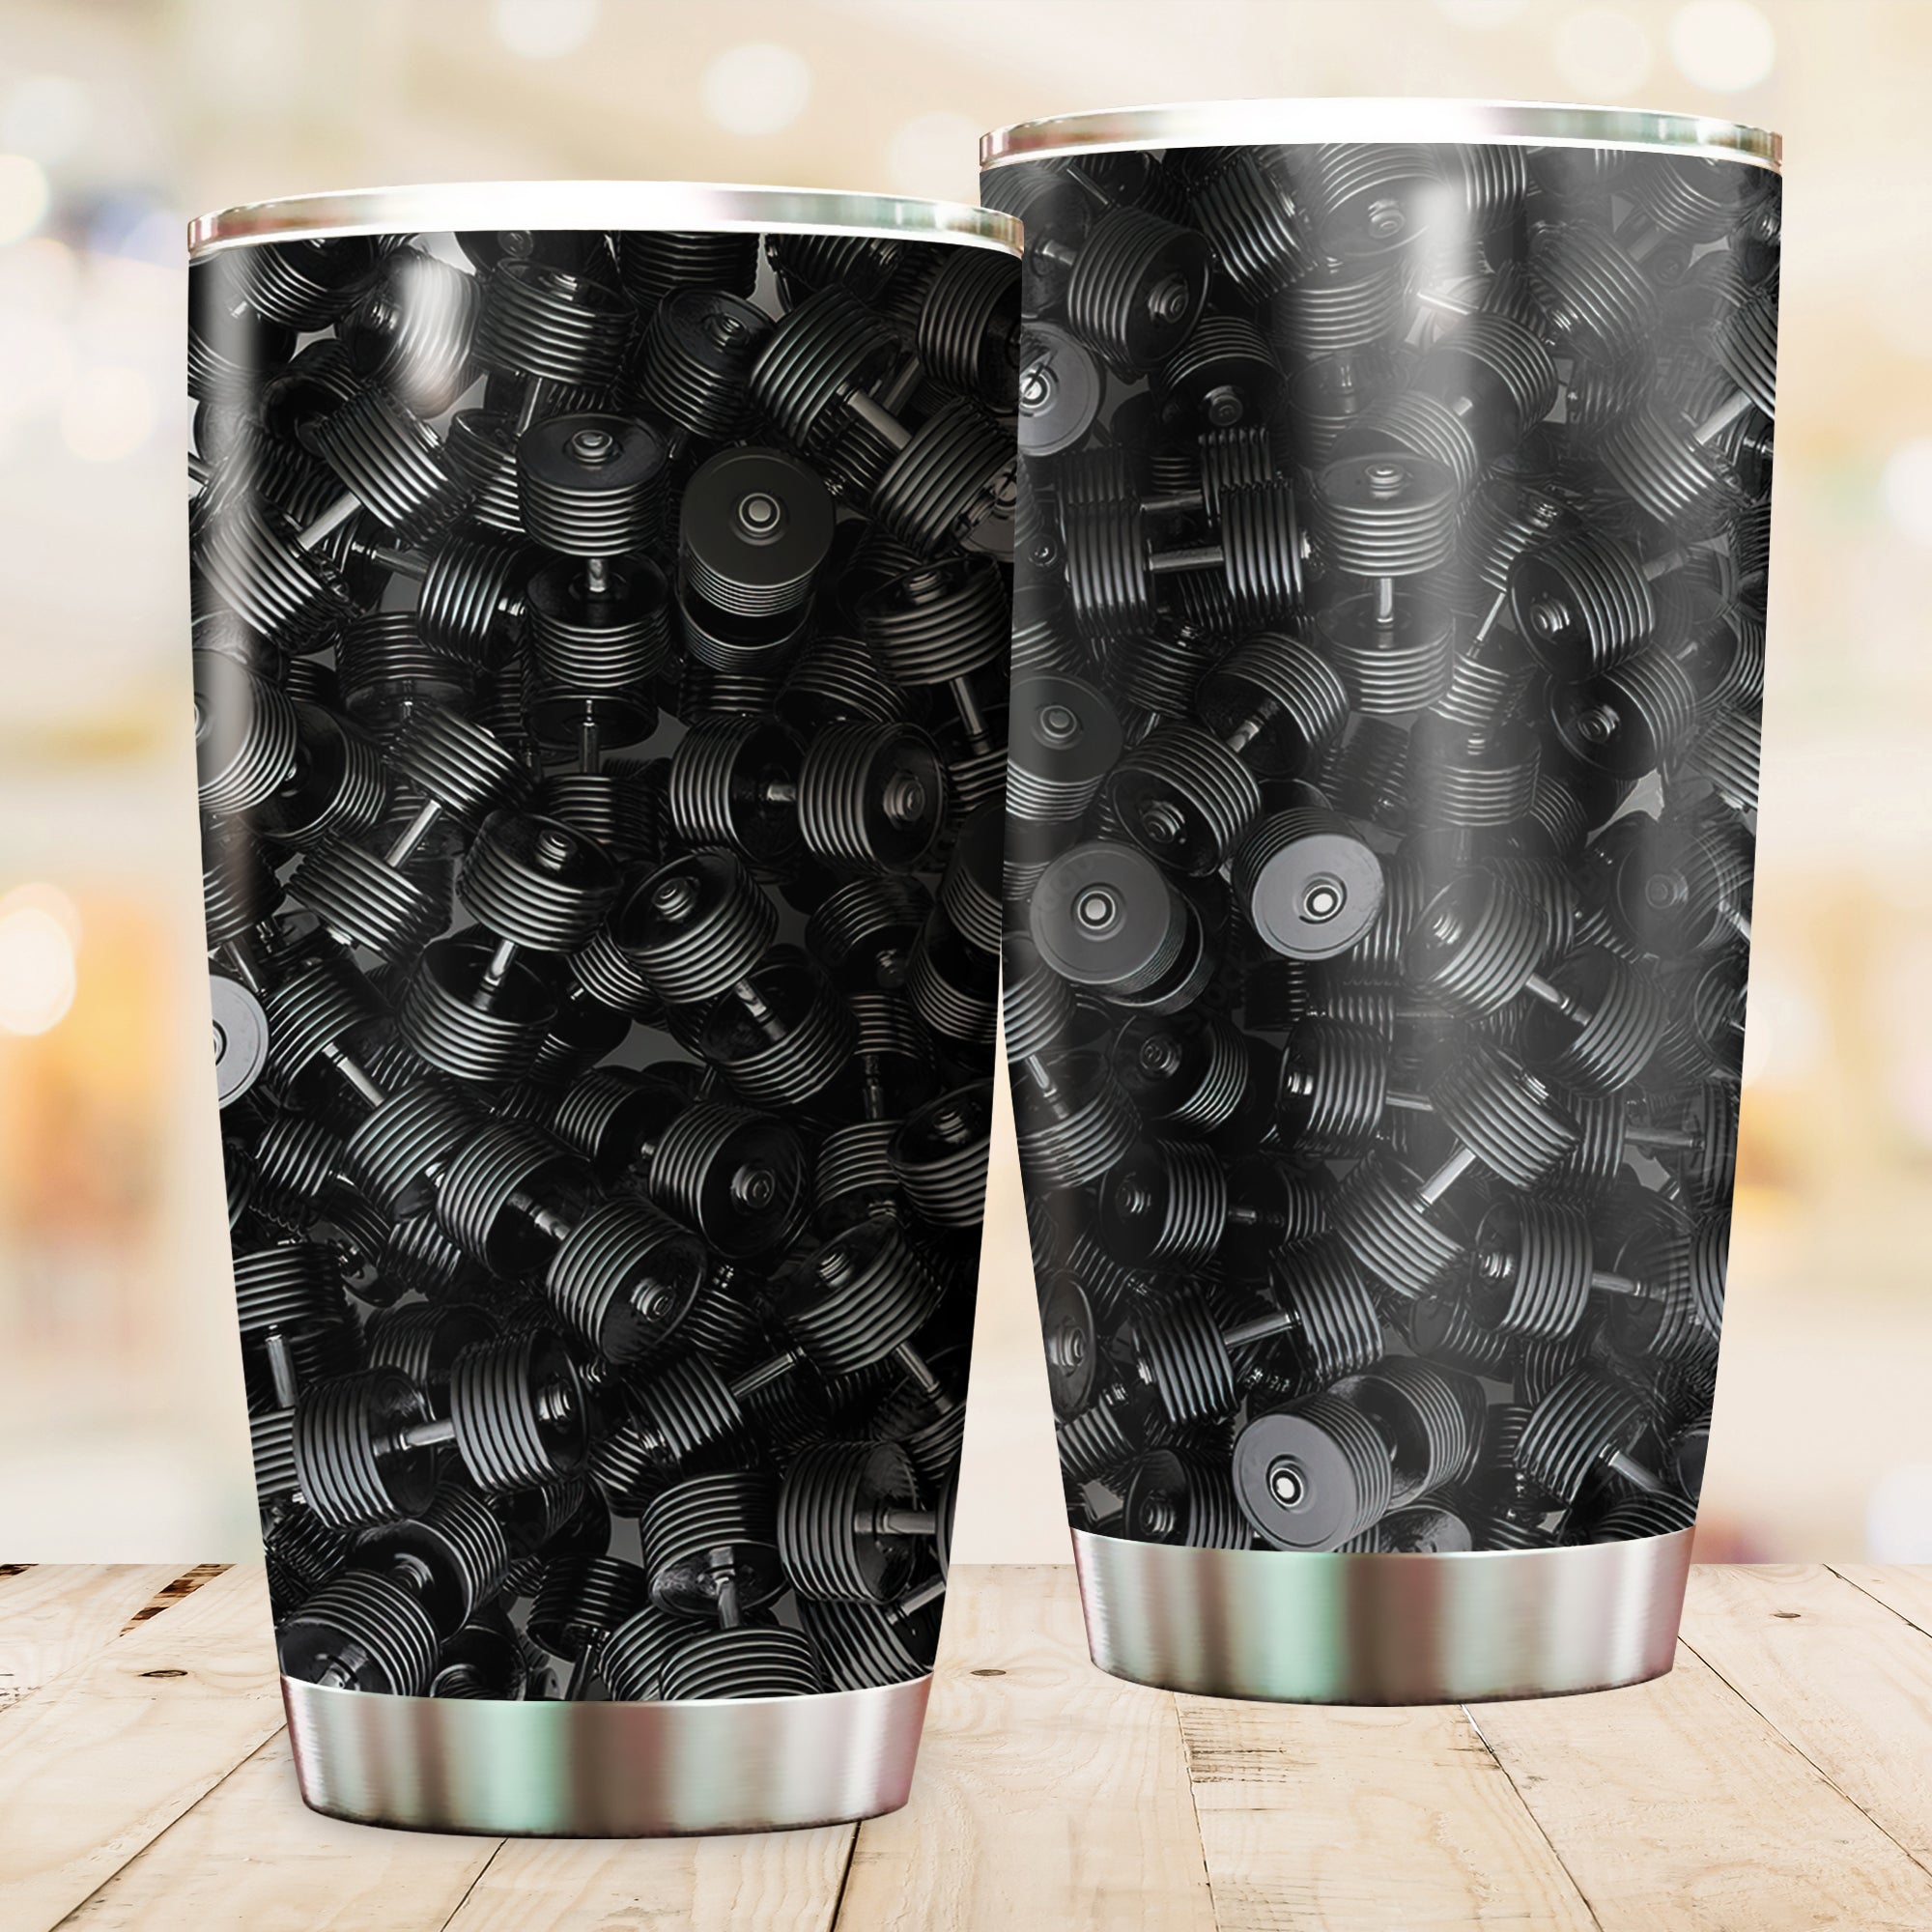 Artistic Fitness Tumbler: Perfect 'Me Time' Gift for Gym Women